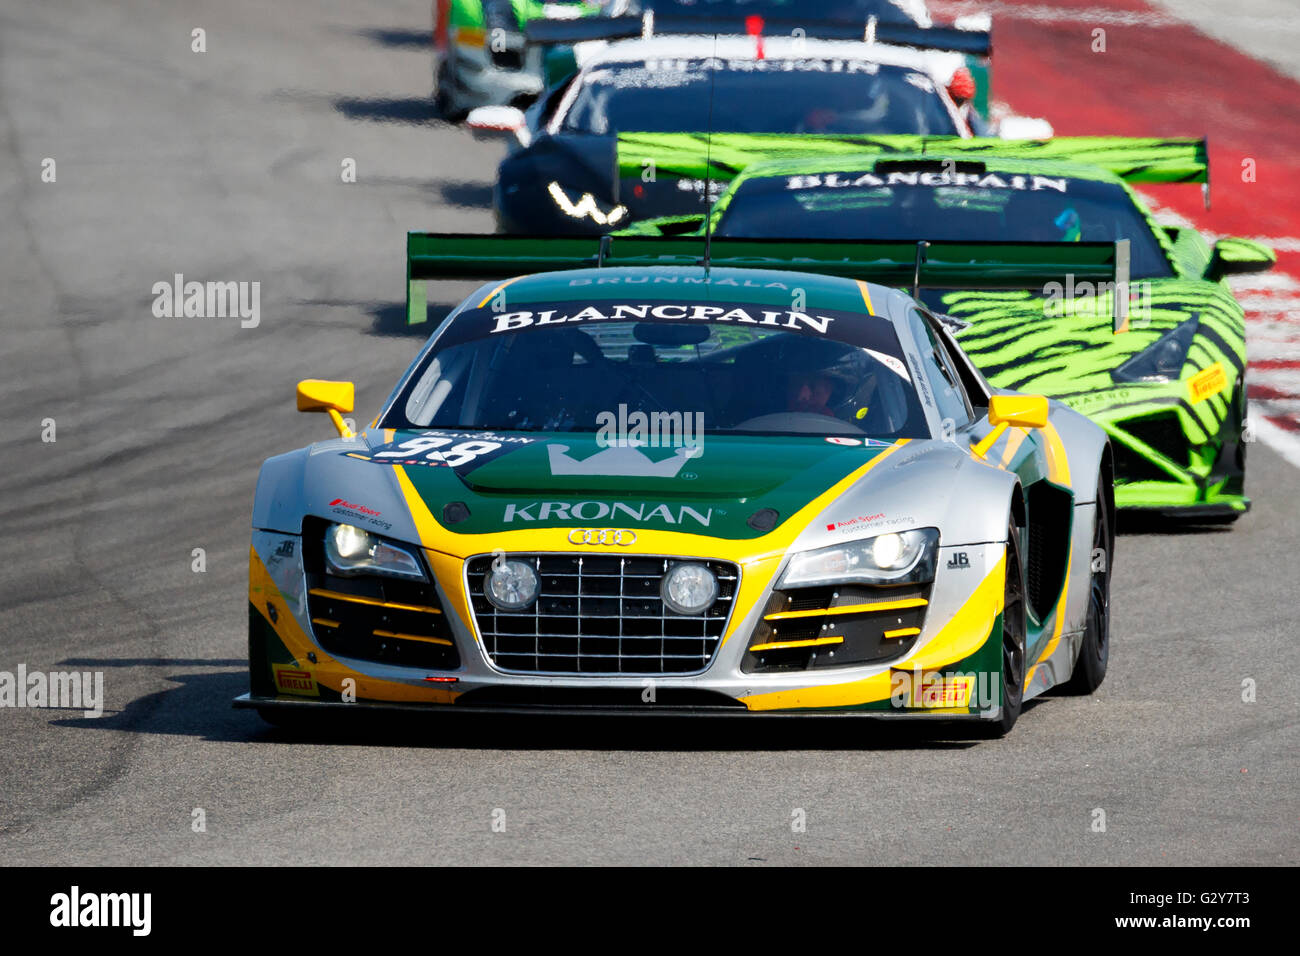 Misano Adriatico, Italy - April 10, 2016: Audi R8 Lms Ultra Of Jb  Motorsport Team, Driven By Jan Brunstedt , The Blancpain Gt Sports Club  Main Race In Misano World Circuit Stock Photo - Alamy